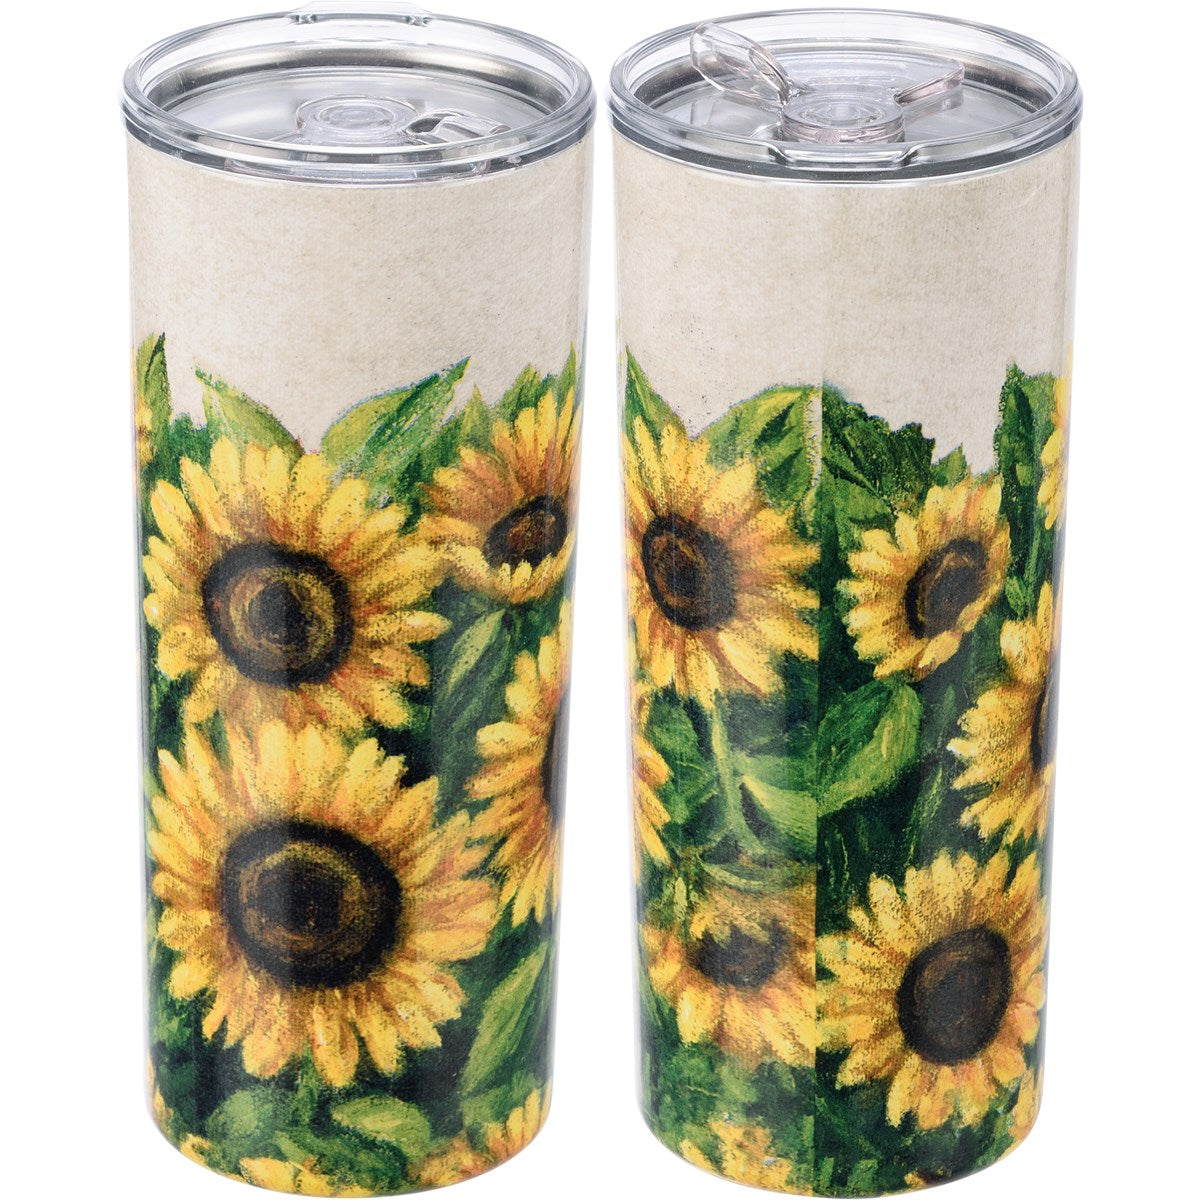 Field of Sunflowers Insulated 20 oz Coffee Tumbler